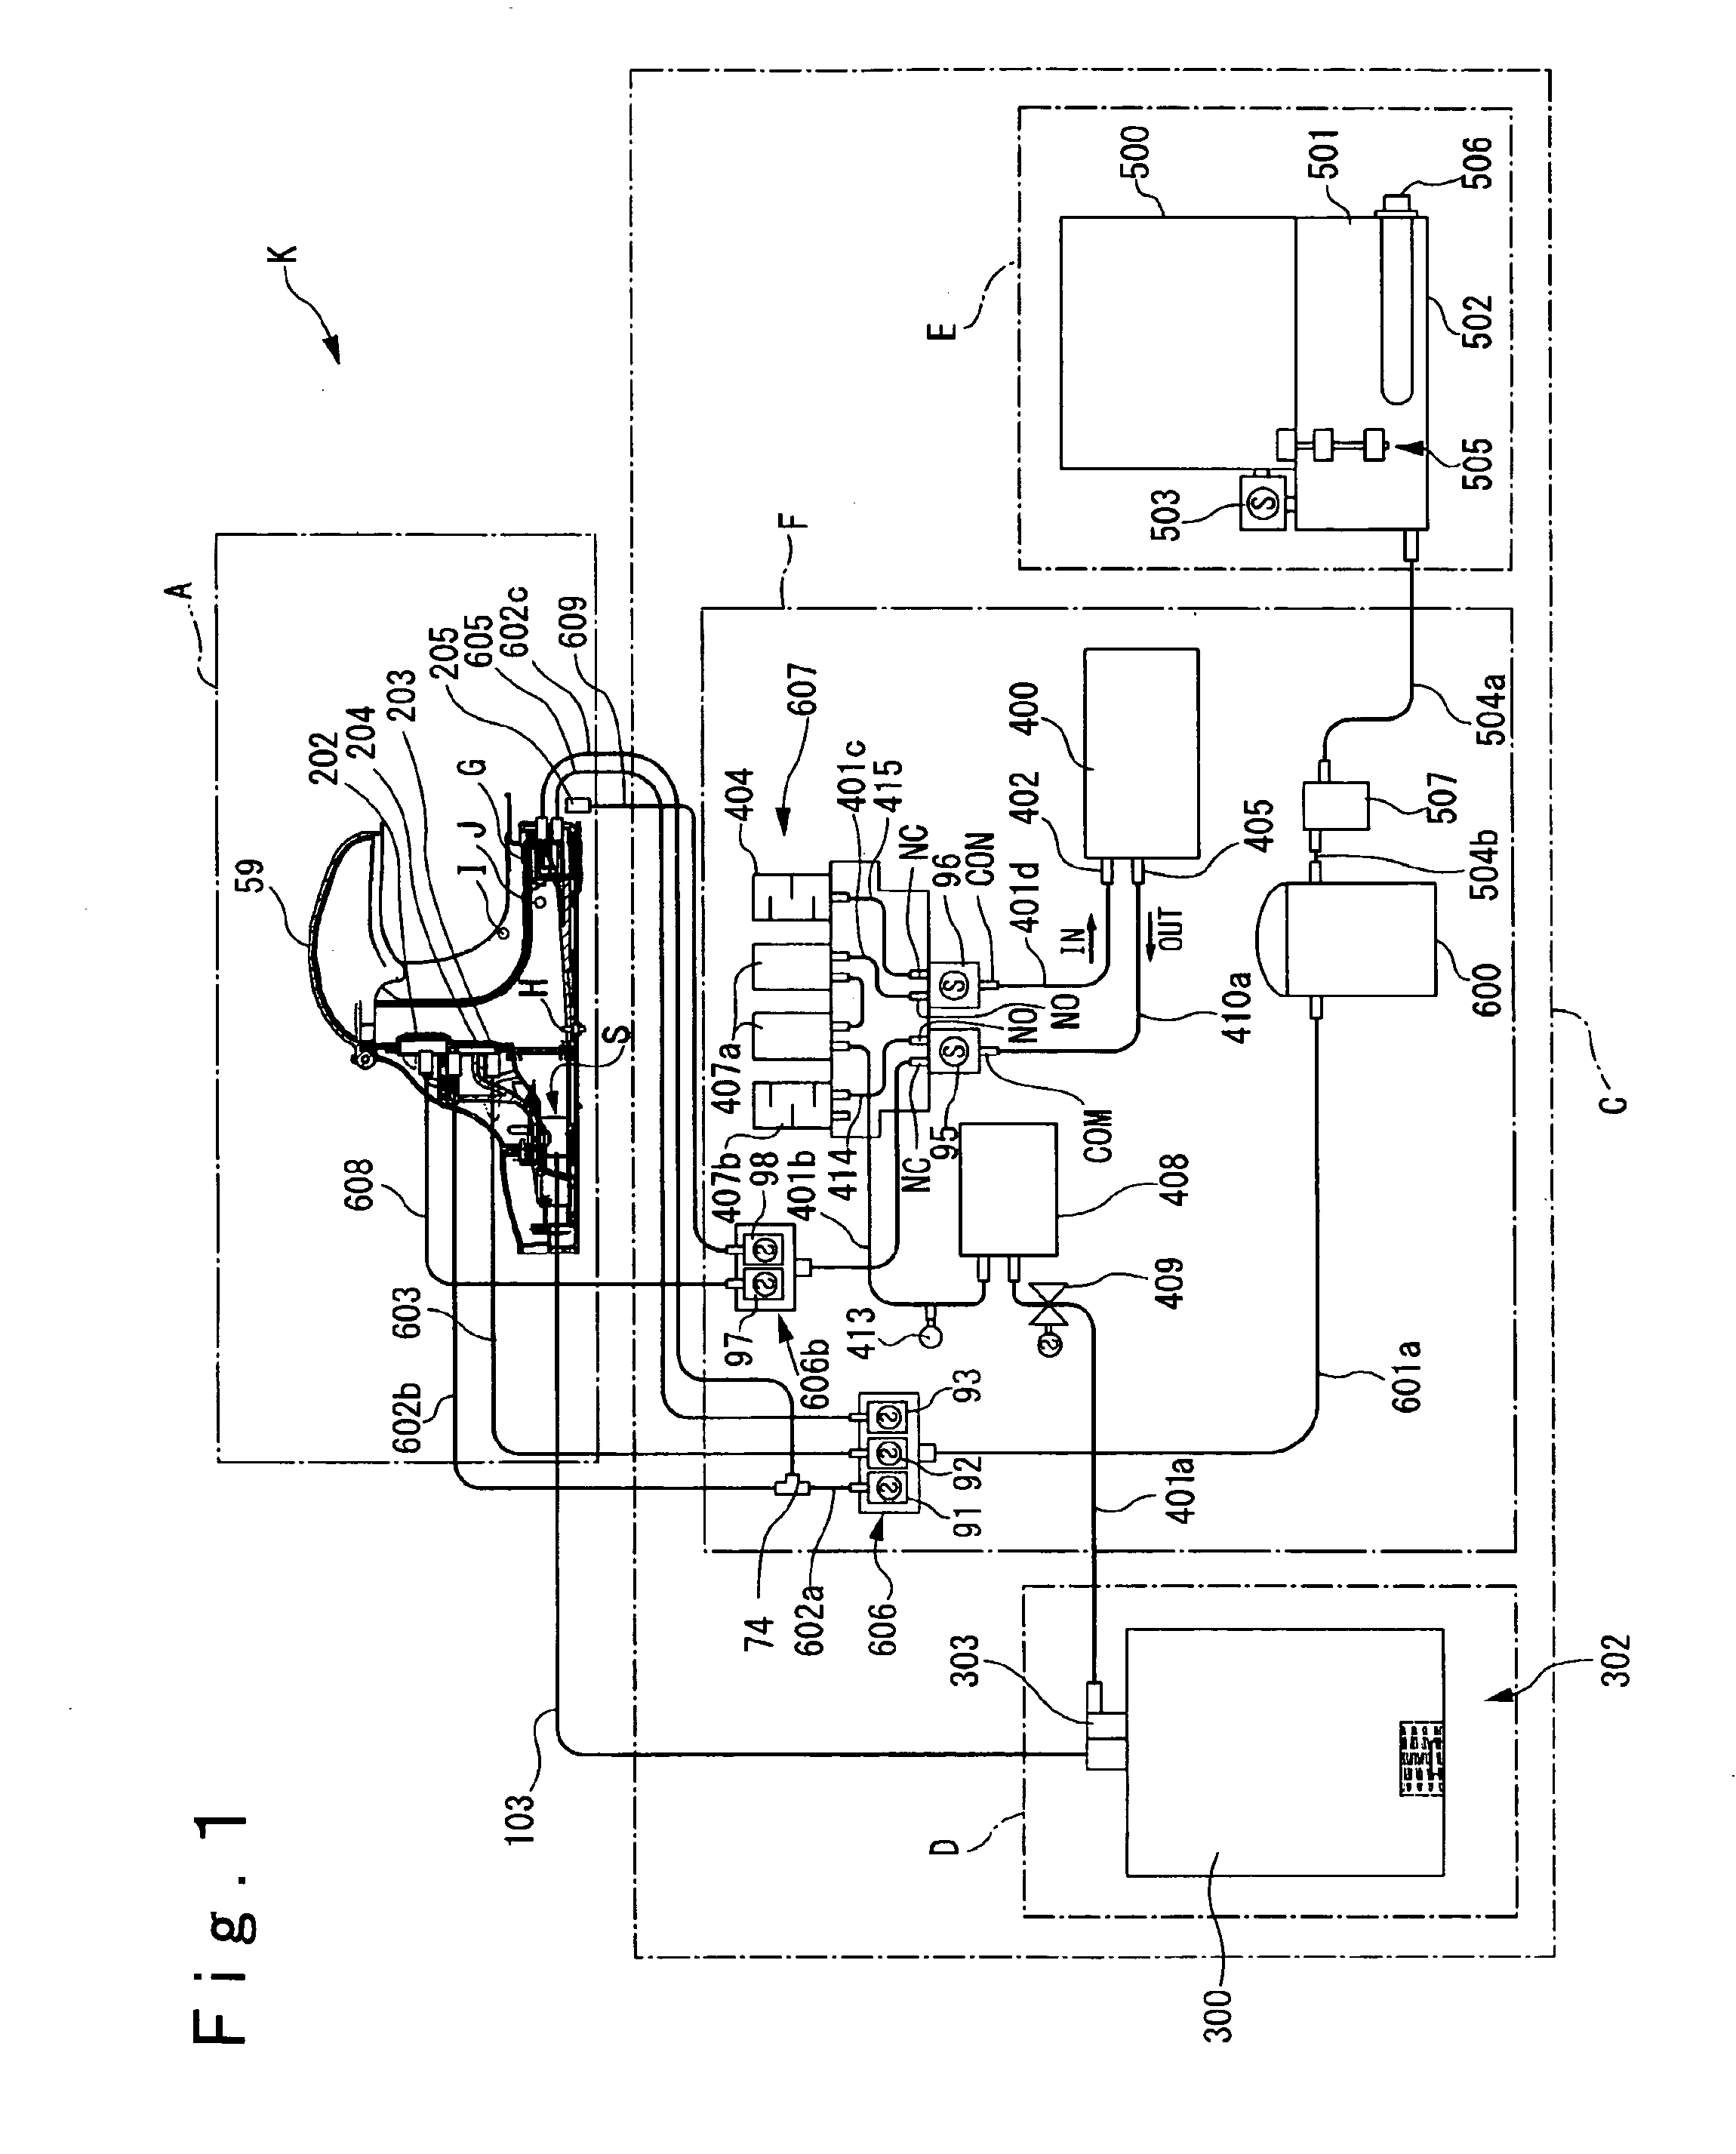 Automatic treating device for urination and defecation